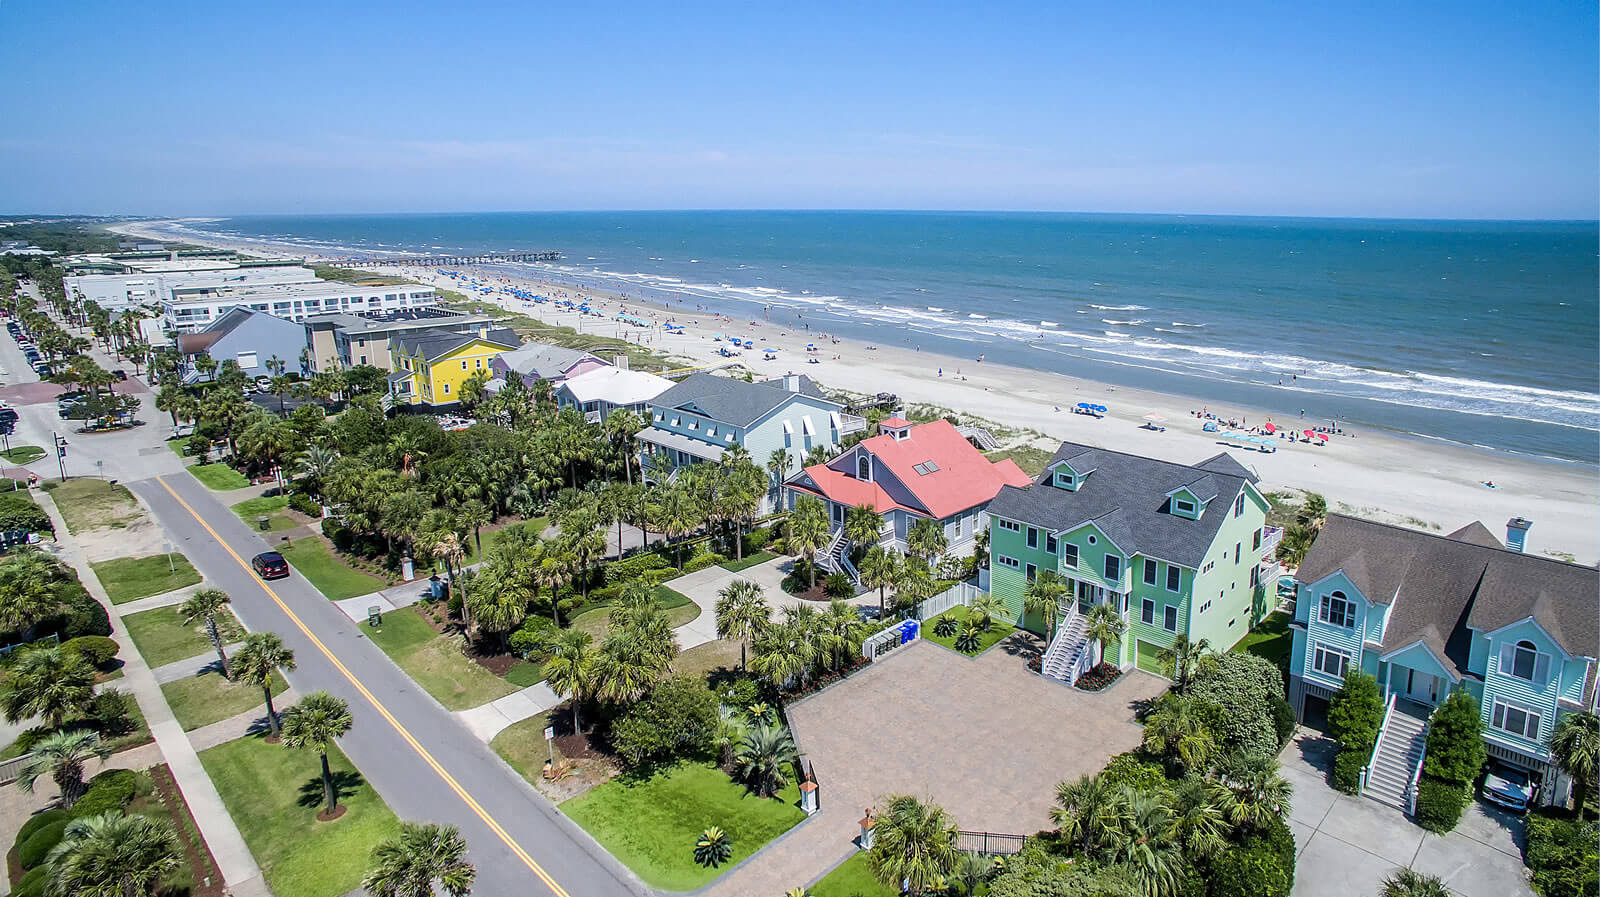 Casa Margarita Right Front Aerial View - Isle of Palms, SC